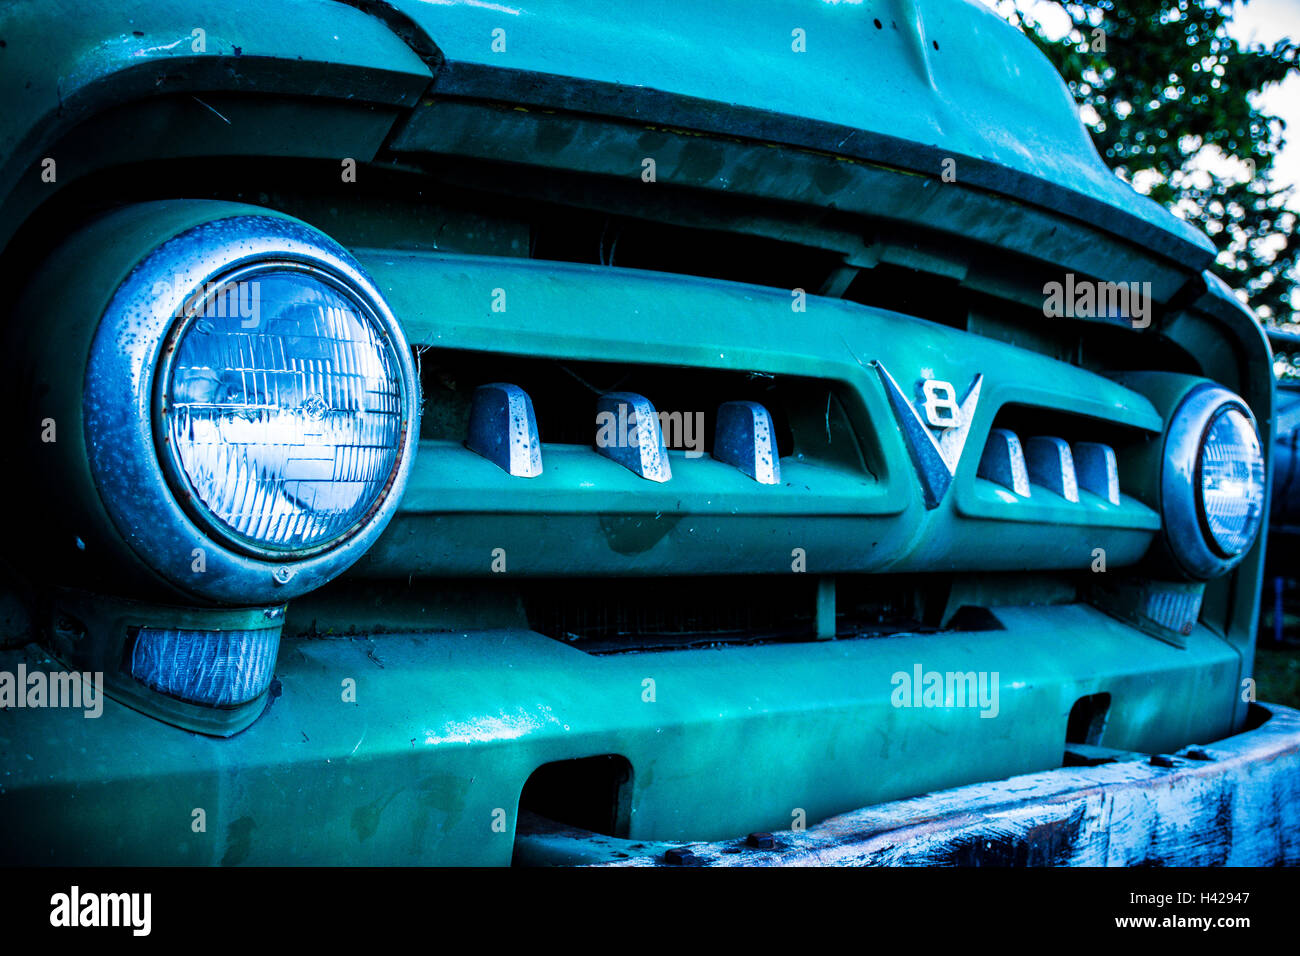 old ford truck Stock Photo